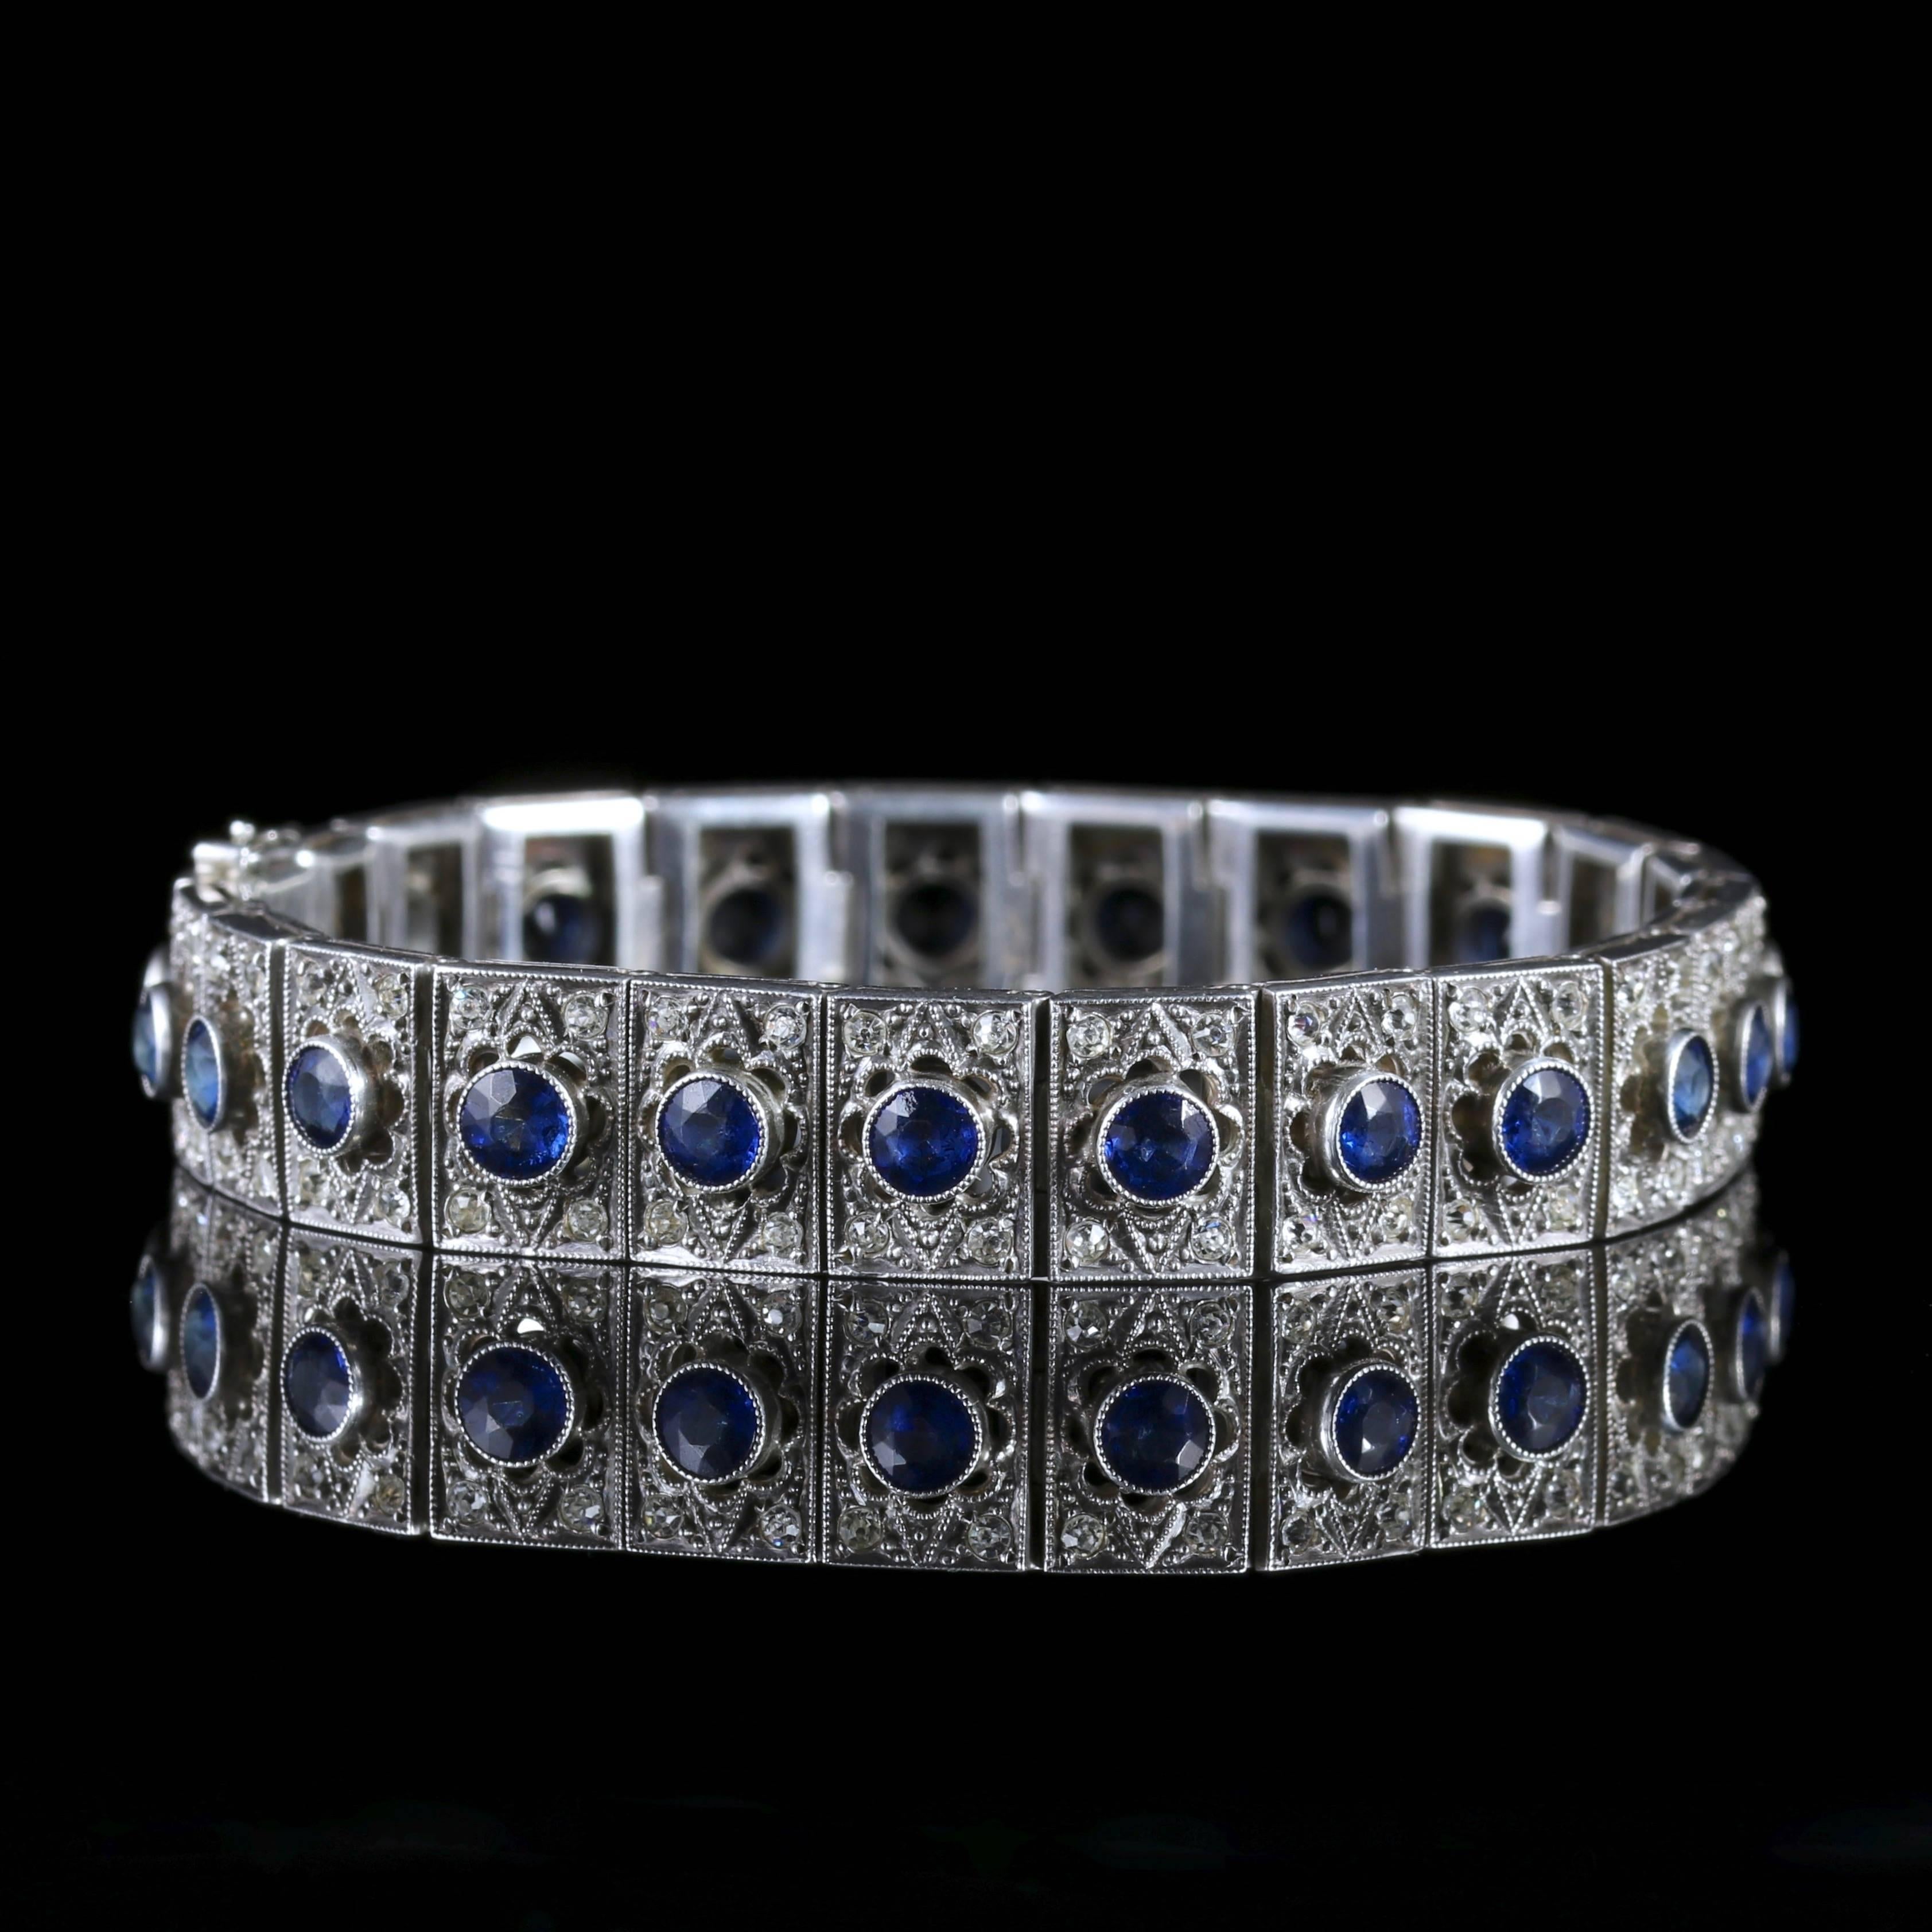 This genuine Sterling Silver Art Deco Paste bracelet is Circa 1920.

Art Deco, named after the 1925 Paris Exposition des Arts Decoratifs et Industriels Modernes, represents the style of the decorative arts popular between the two wars.

Each link is